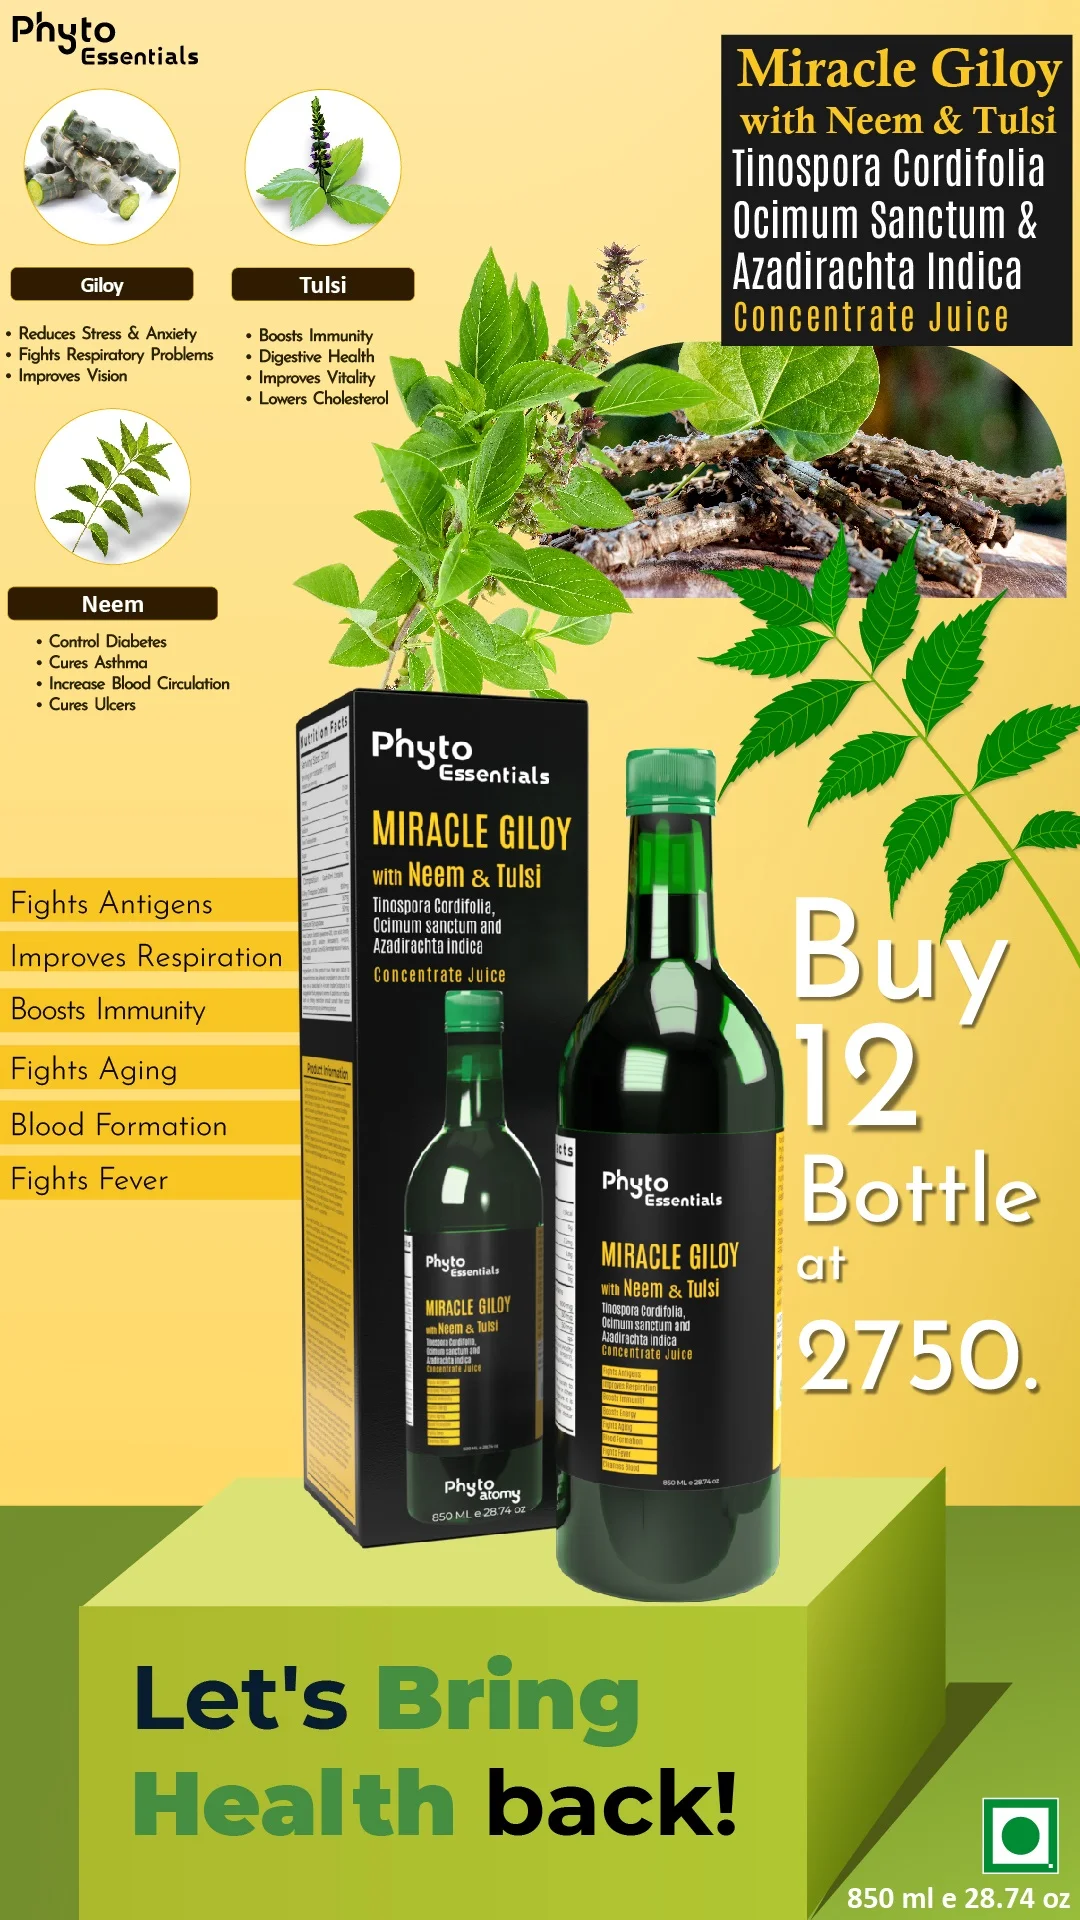 RBV B2B Miracle Giloy With Neem & Tulsi 850ml-12 Pcs.